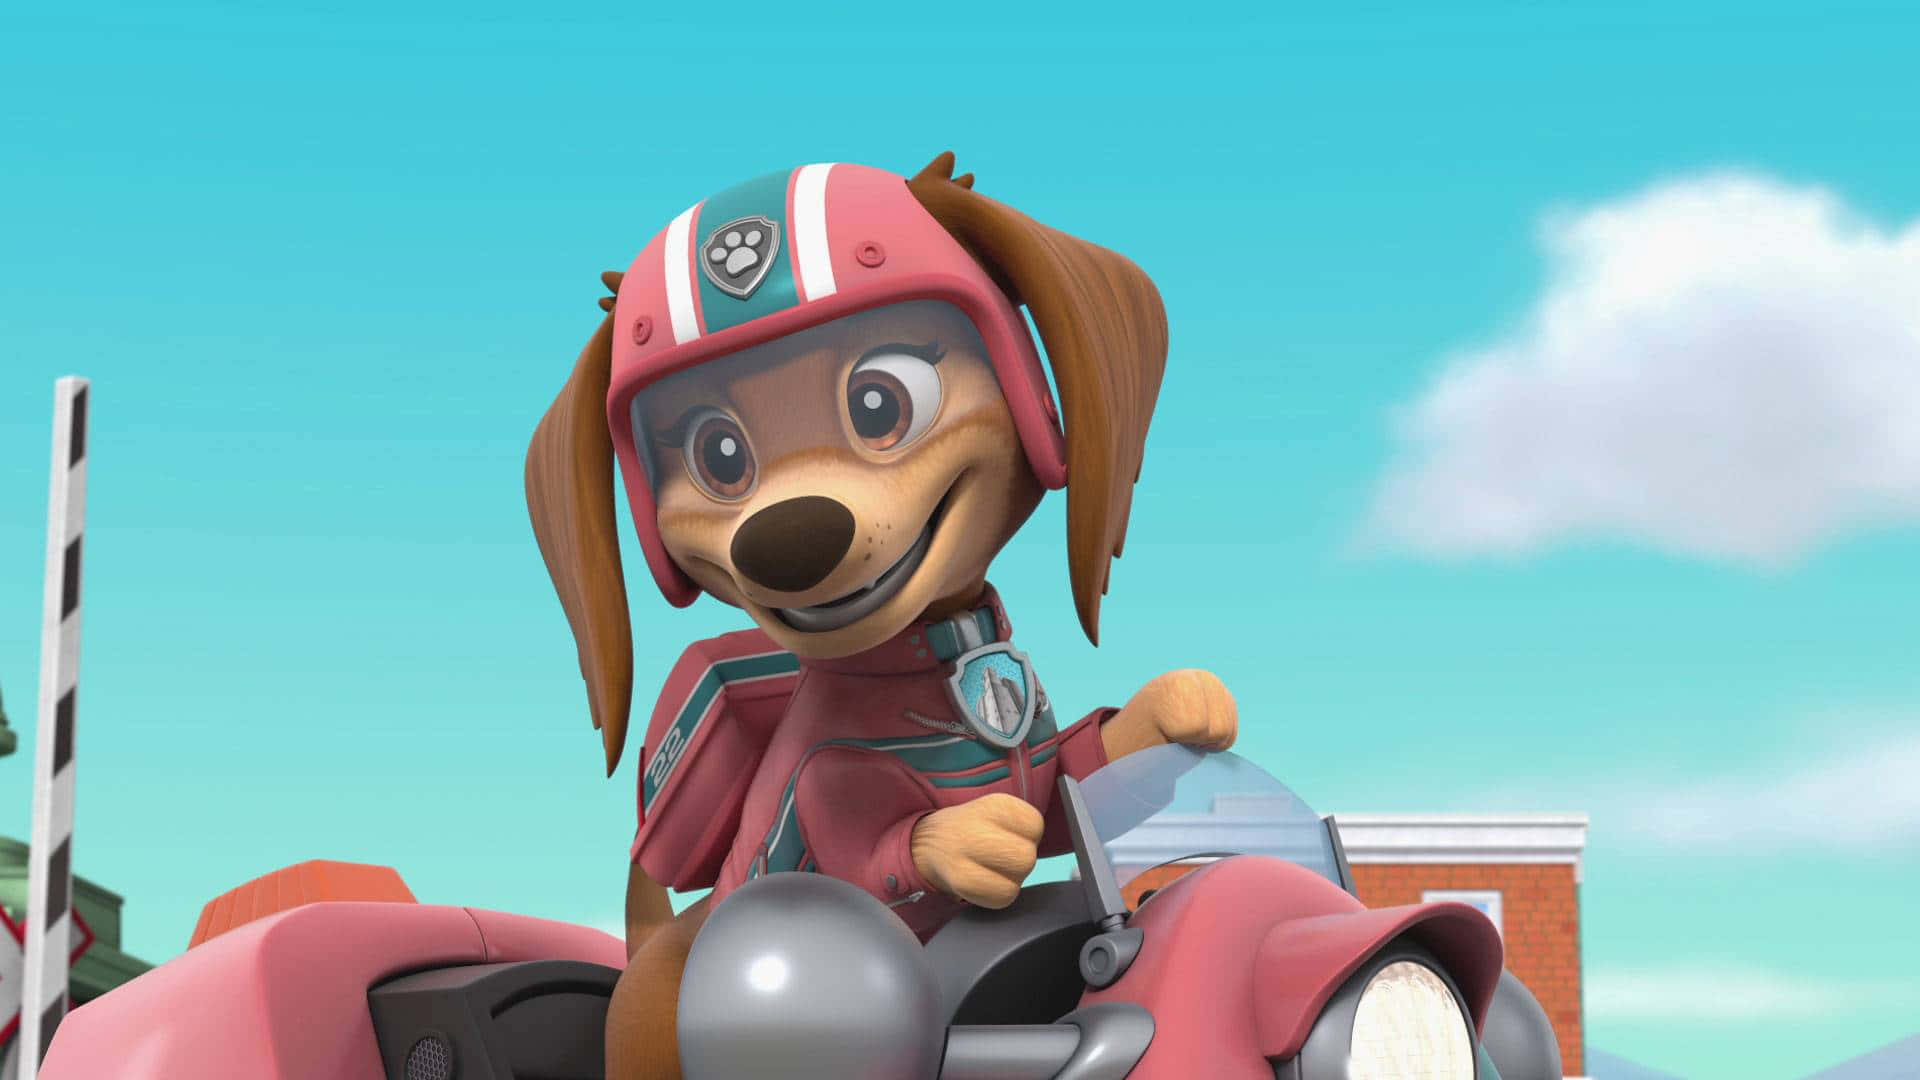 "Come join the Paw Patrol, and help us keep Adventure Bay safe!"